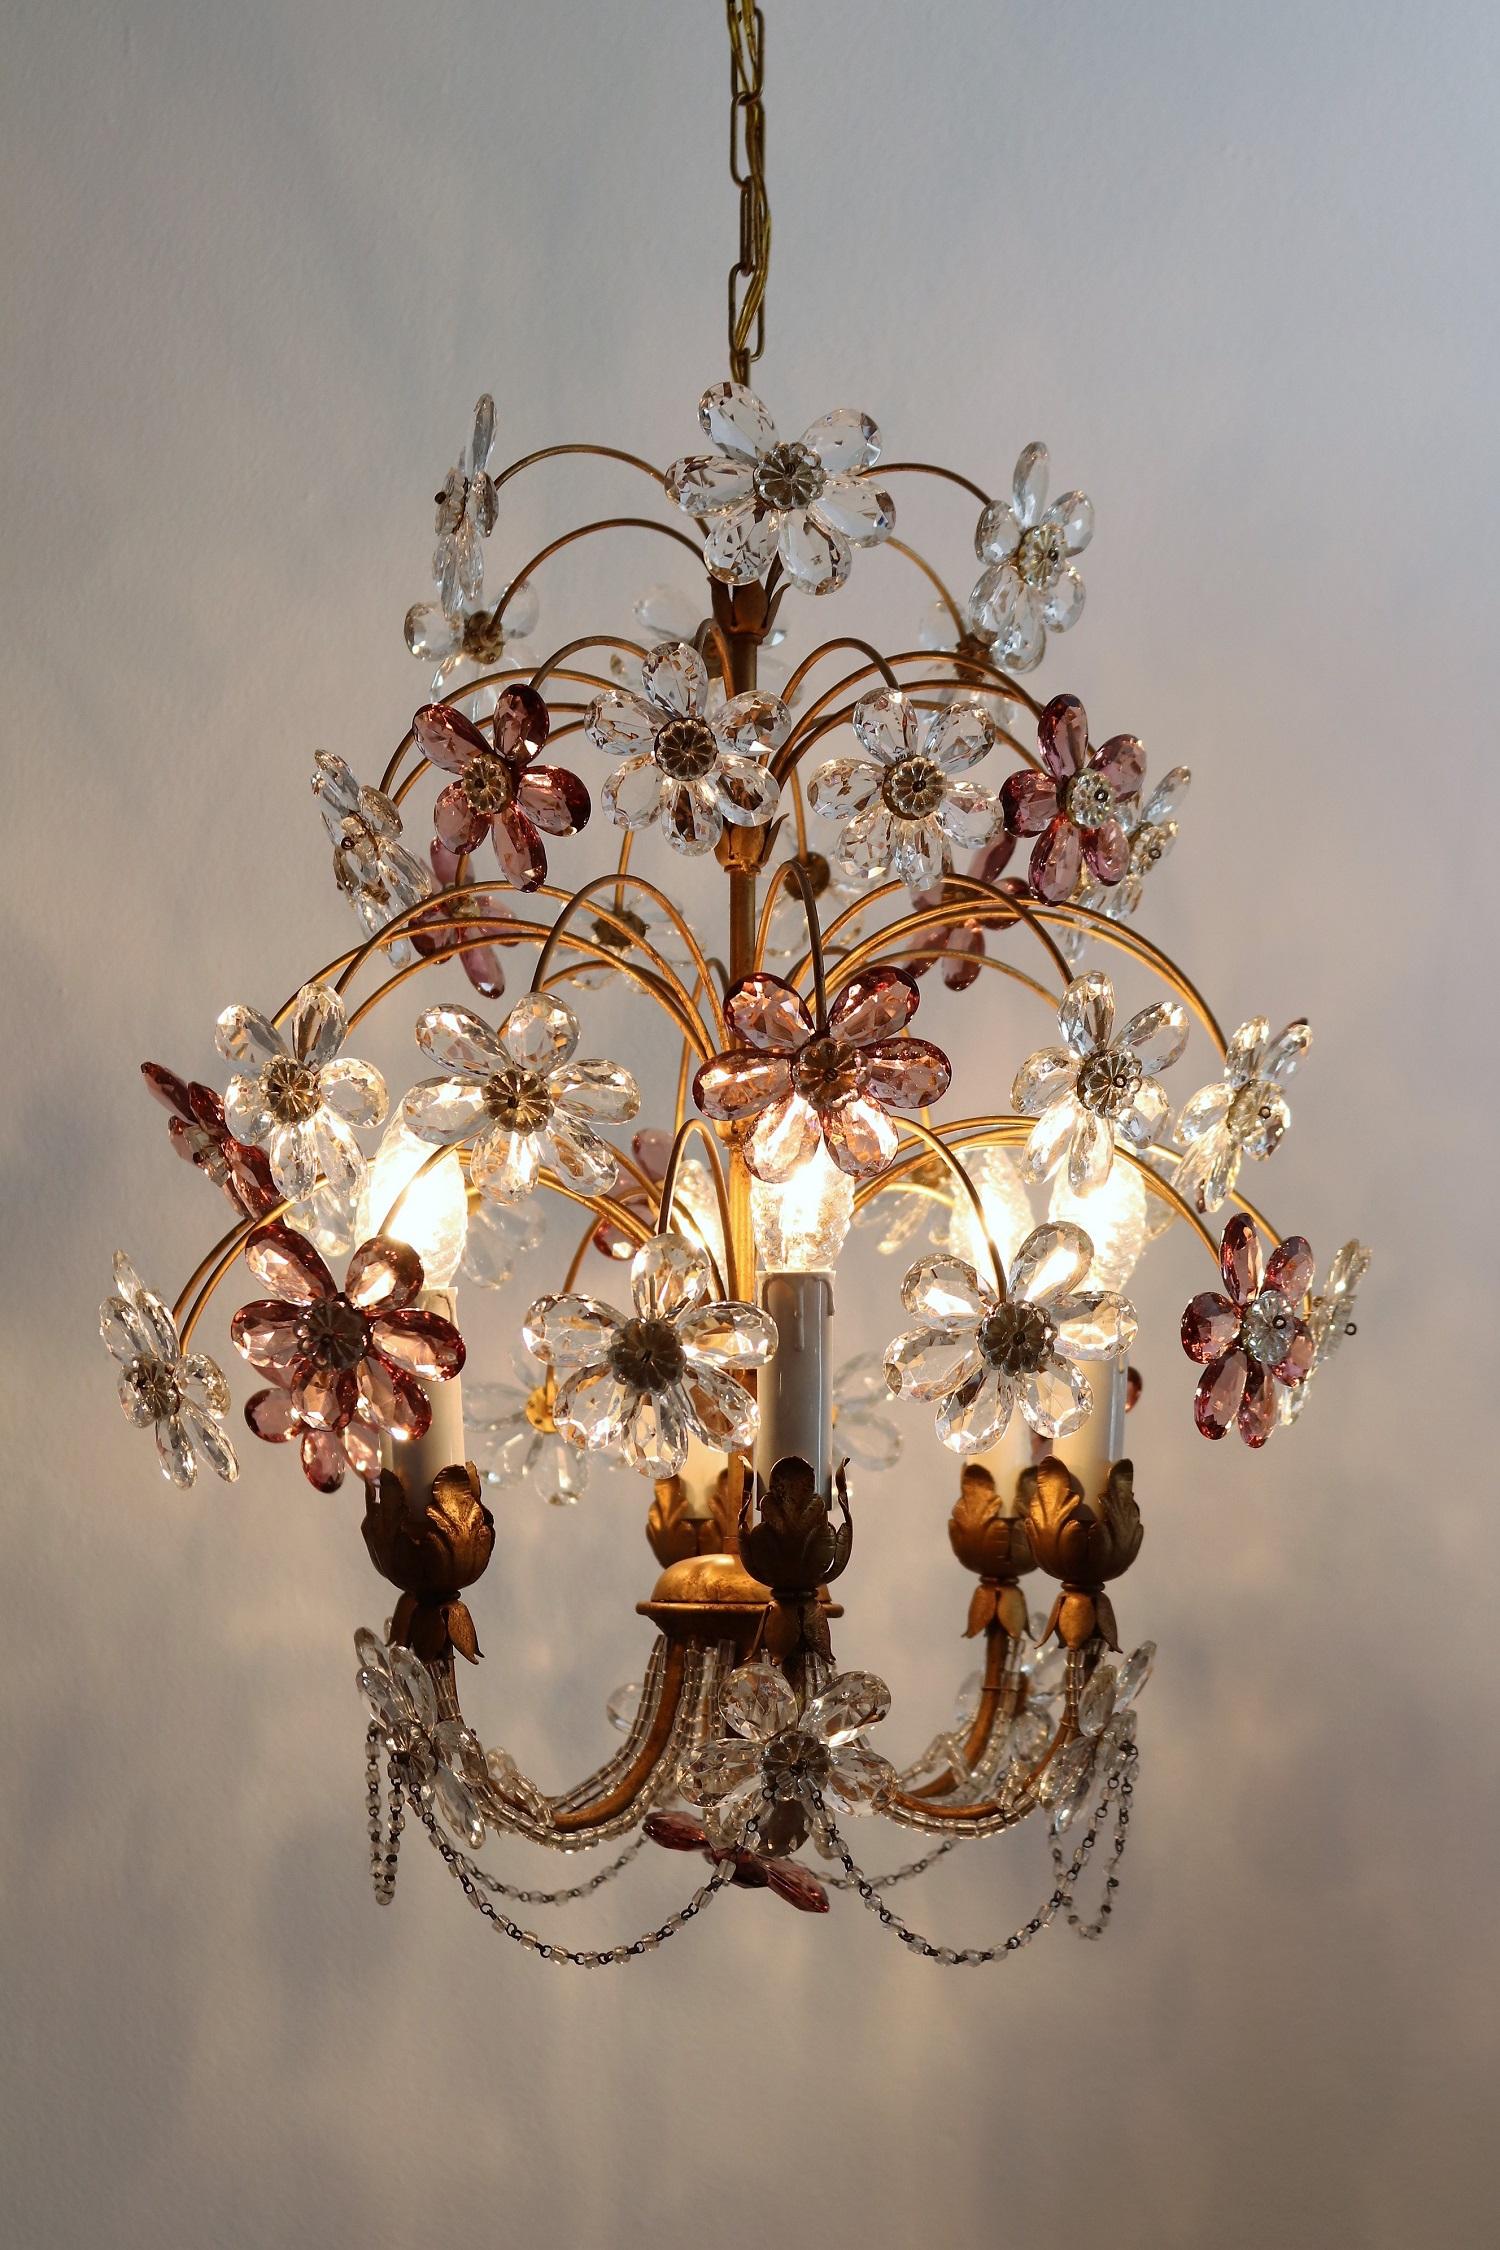 Beautiful chandelier made in Italy in the 1950s with transparent and lilac - purple Murano drops, which represents a cascade of flowers.
Studded with pearl chains.
The chandelier has 6 sockets for E14 light bulbs each 40W max.
It is in a very good